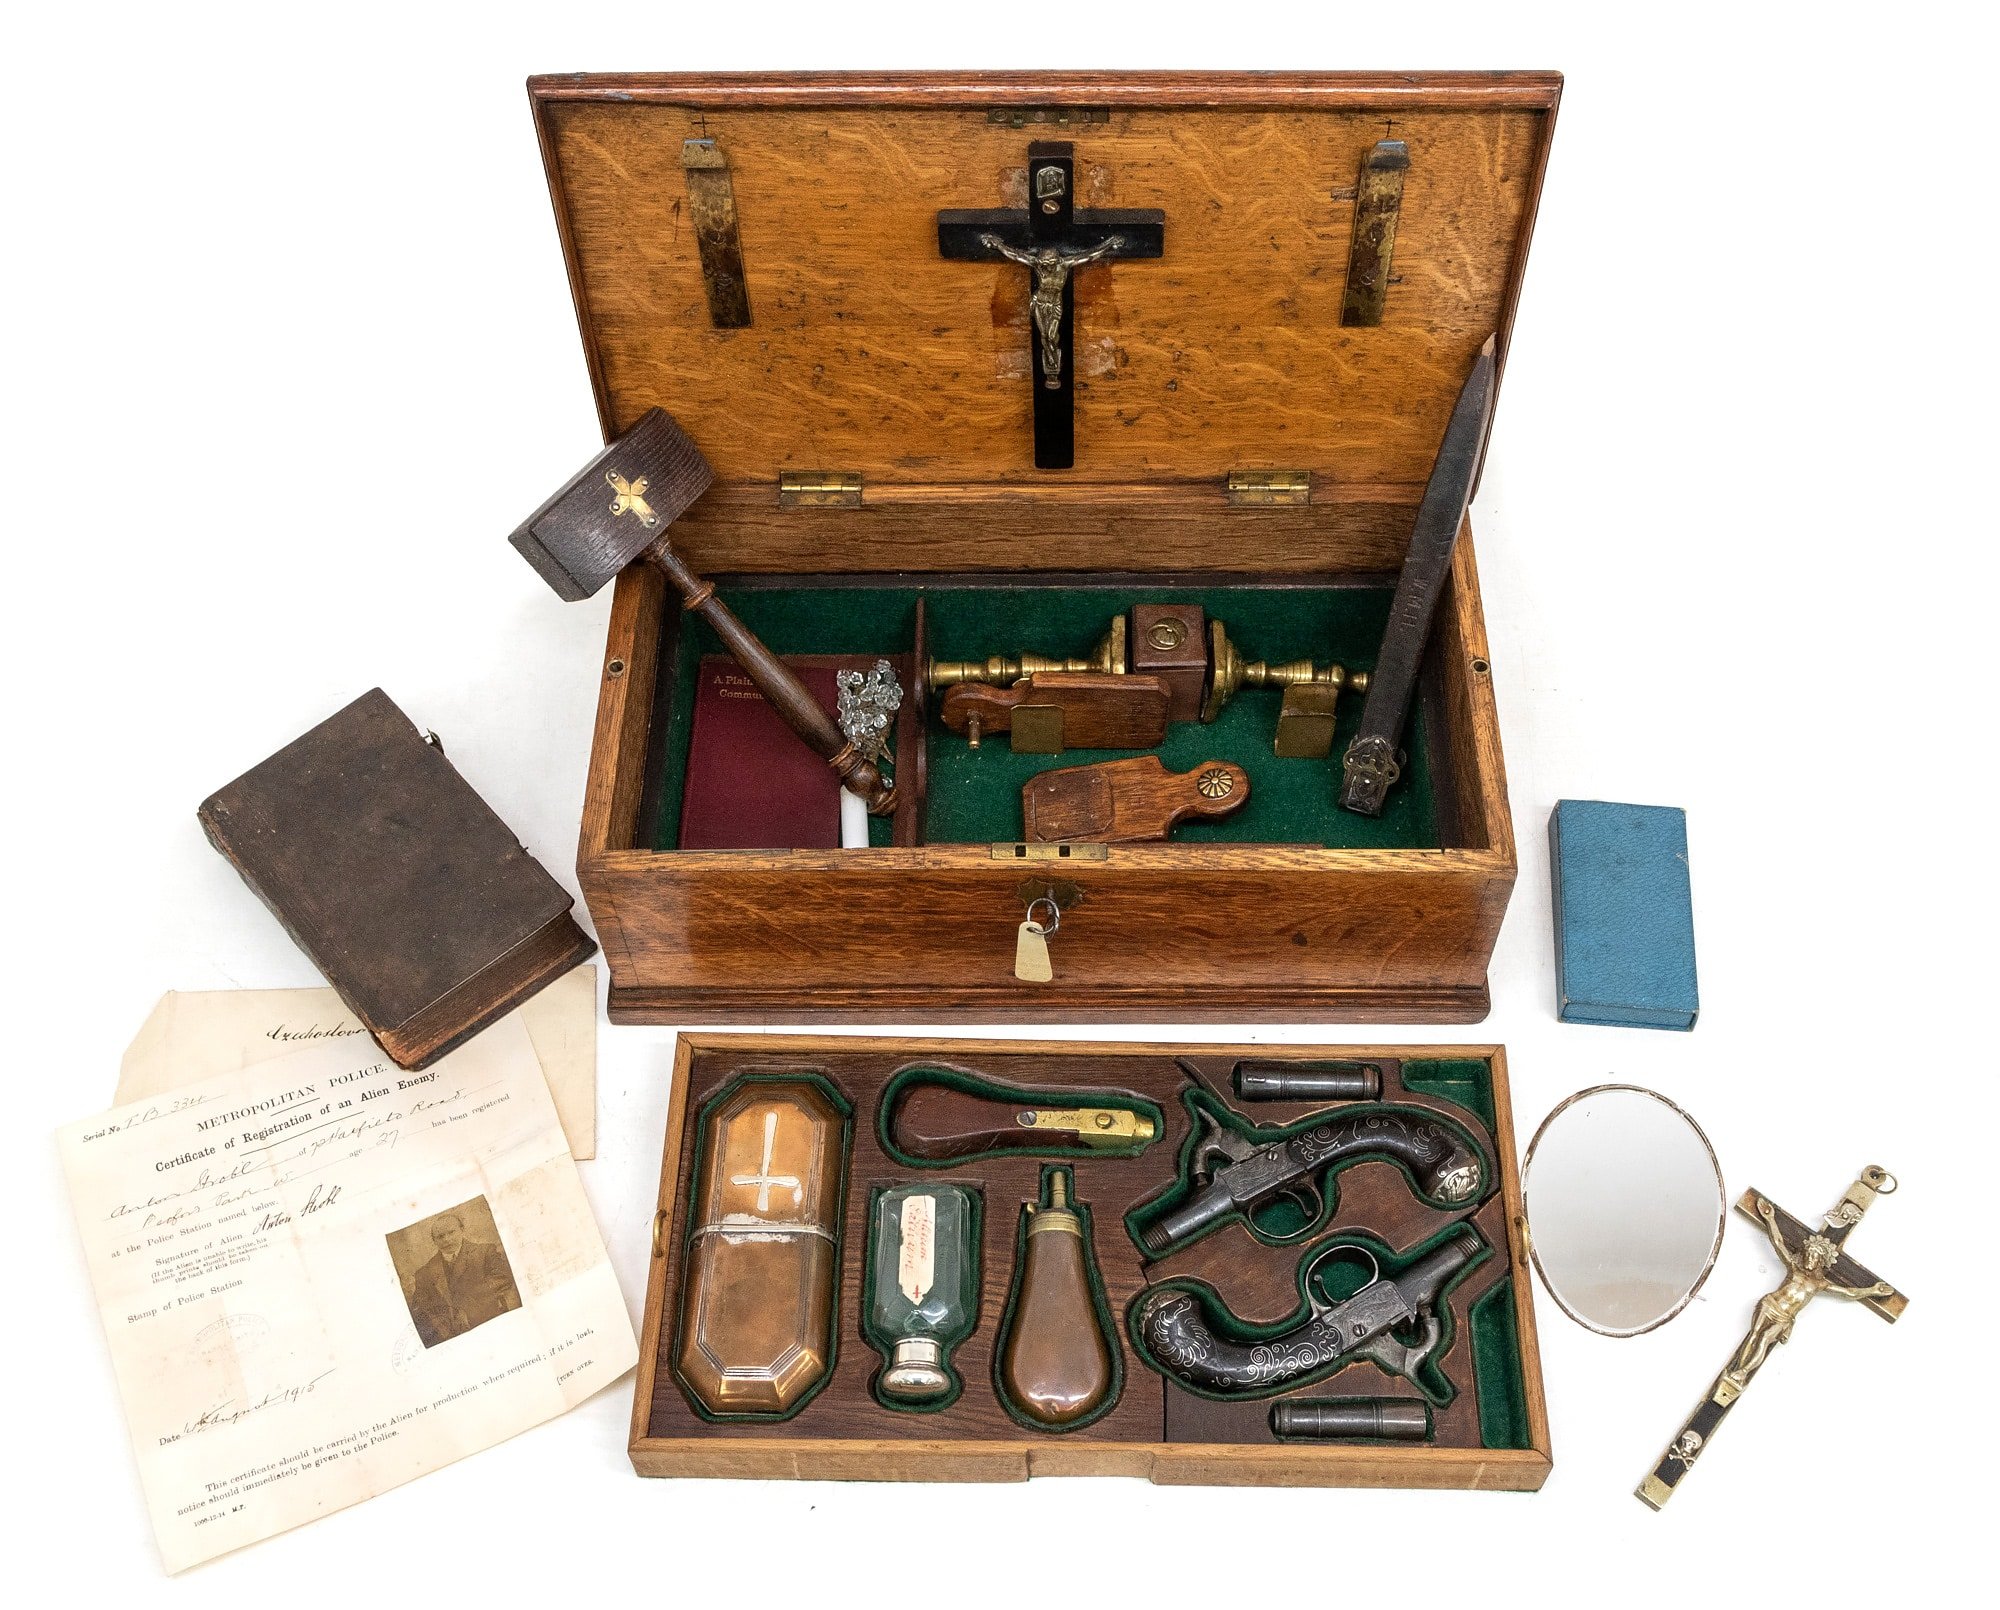 A Vampire-Hunting Kit Purportedly From the 19th Century Sells for $20,000  in the U.K., Exploding Its Meager $2,400 Estimate